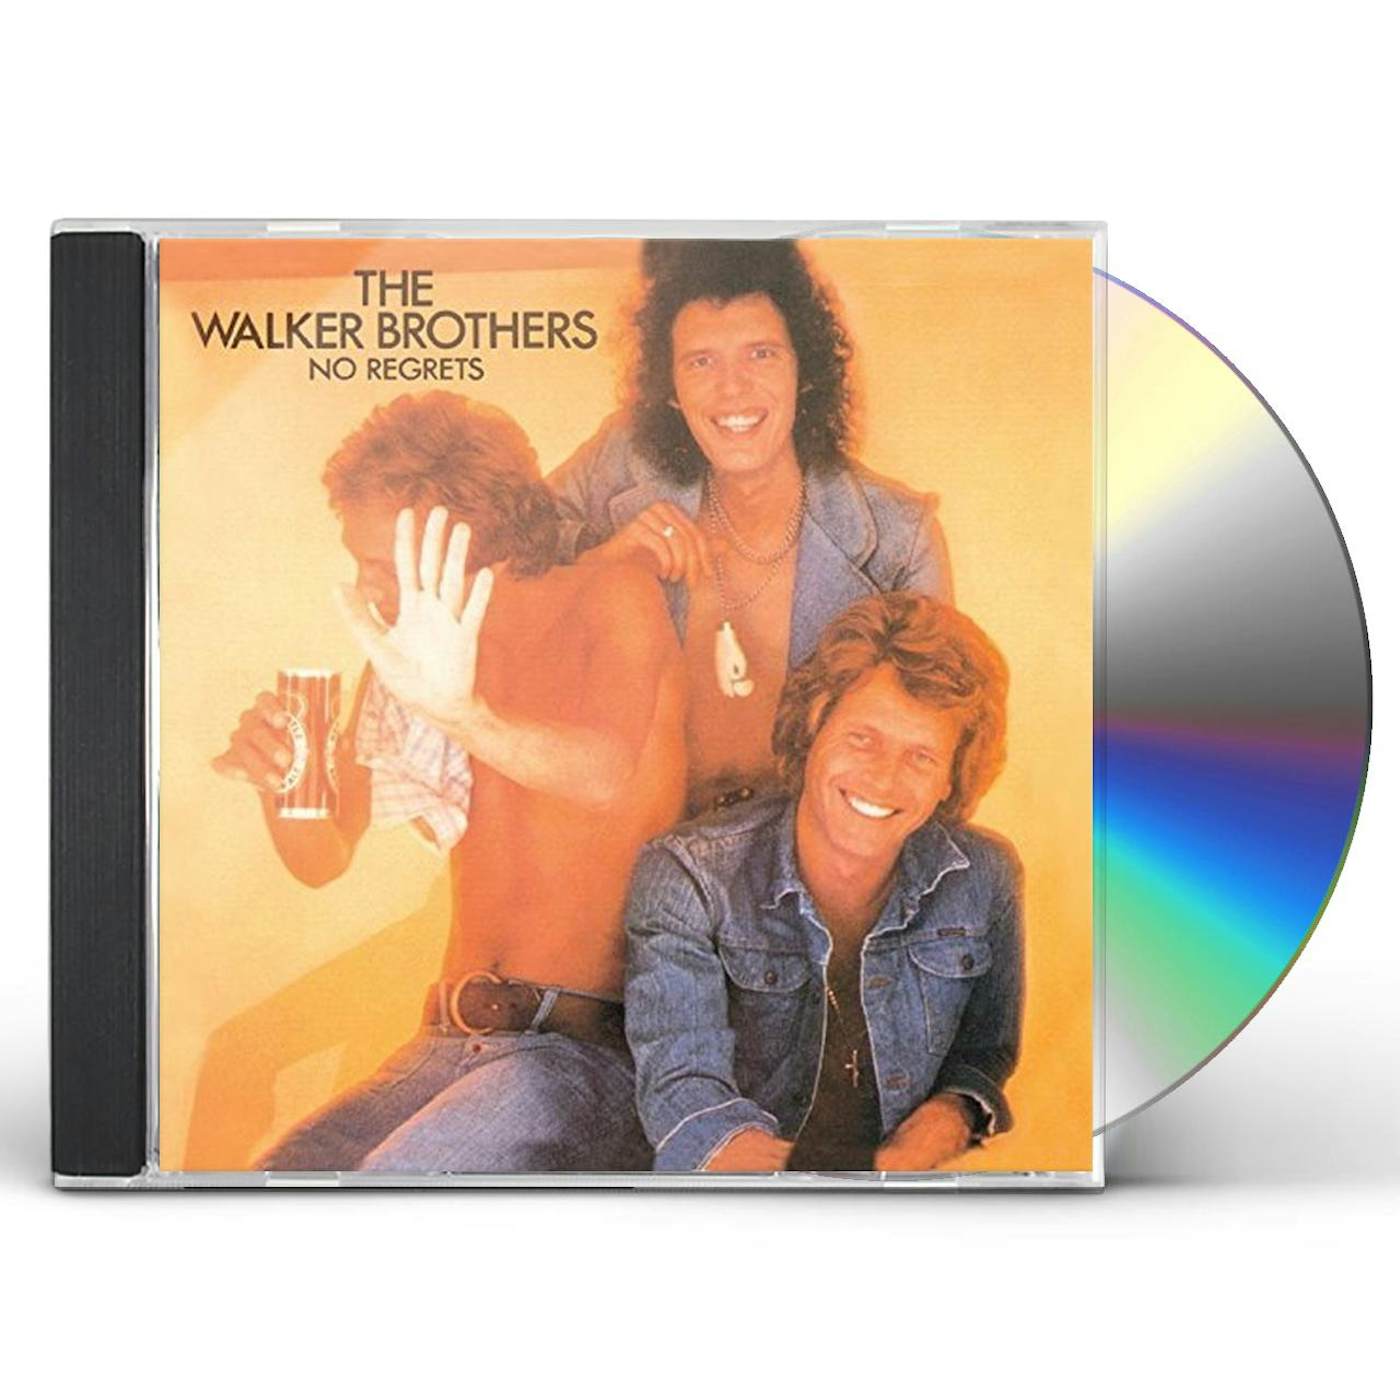 The Walker Brothers NO REGRETS CD